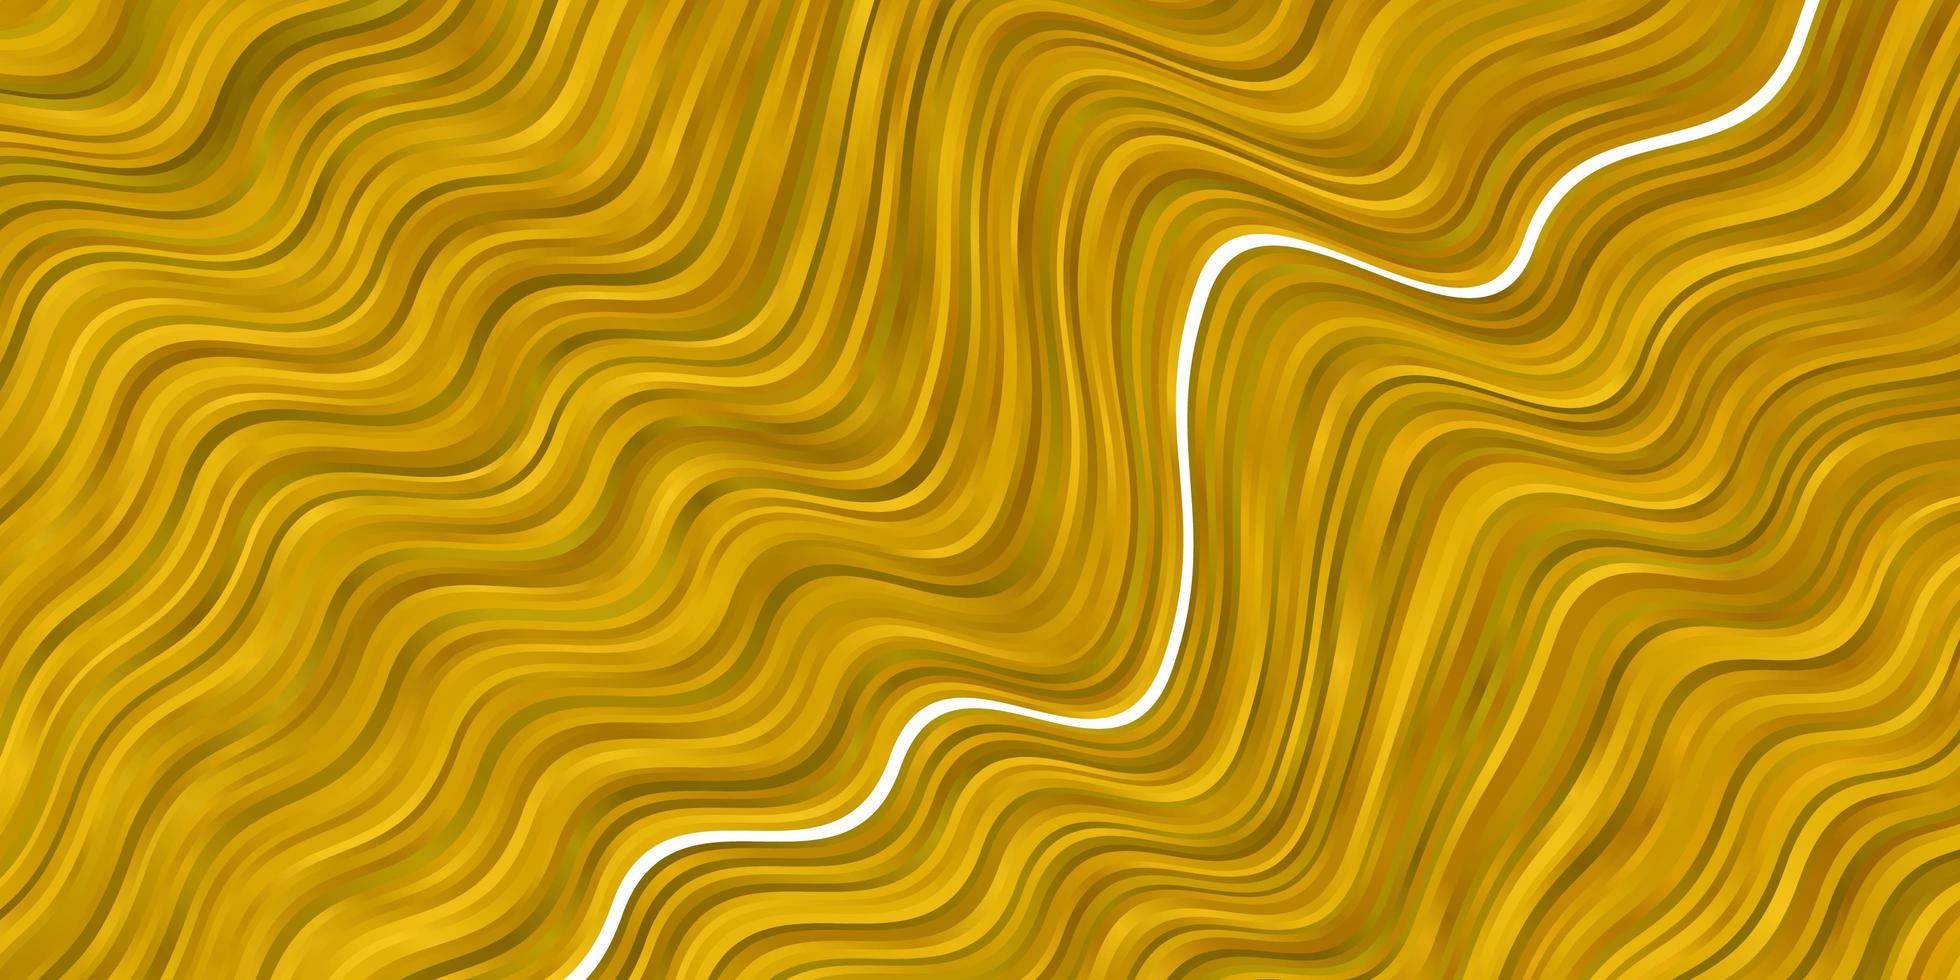 Dark Yellow vector layout with curves.